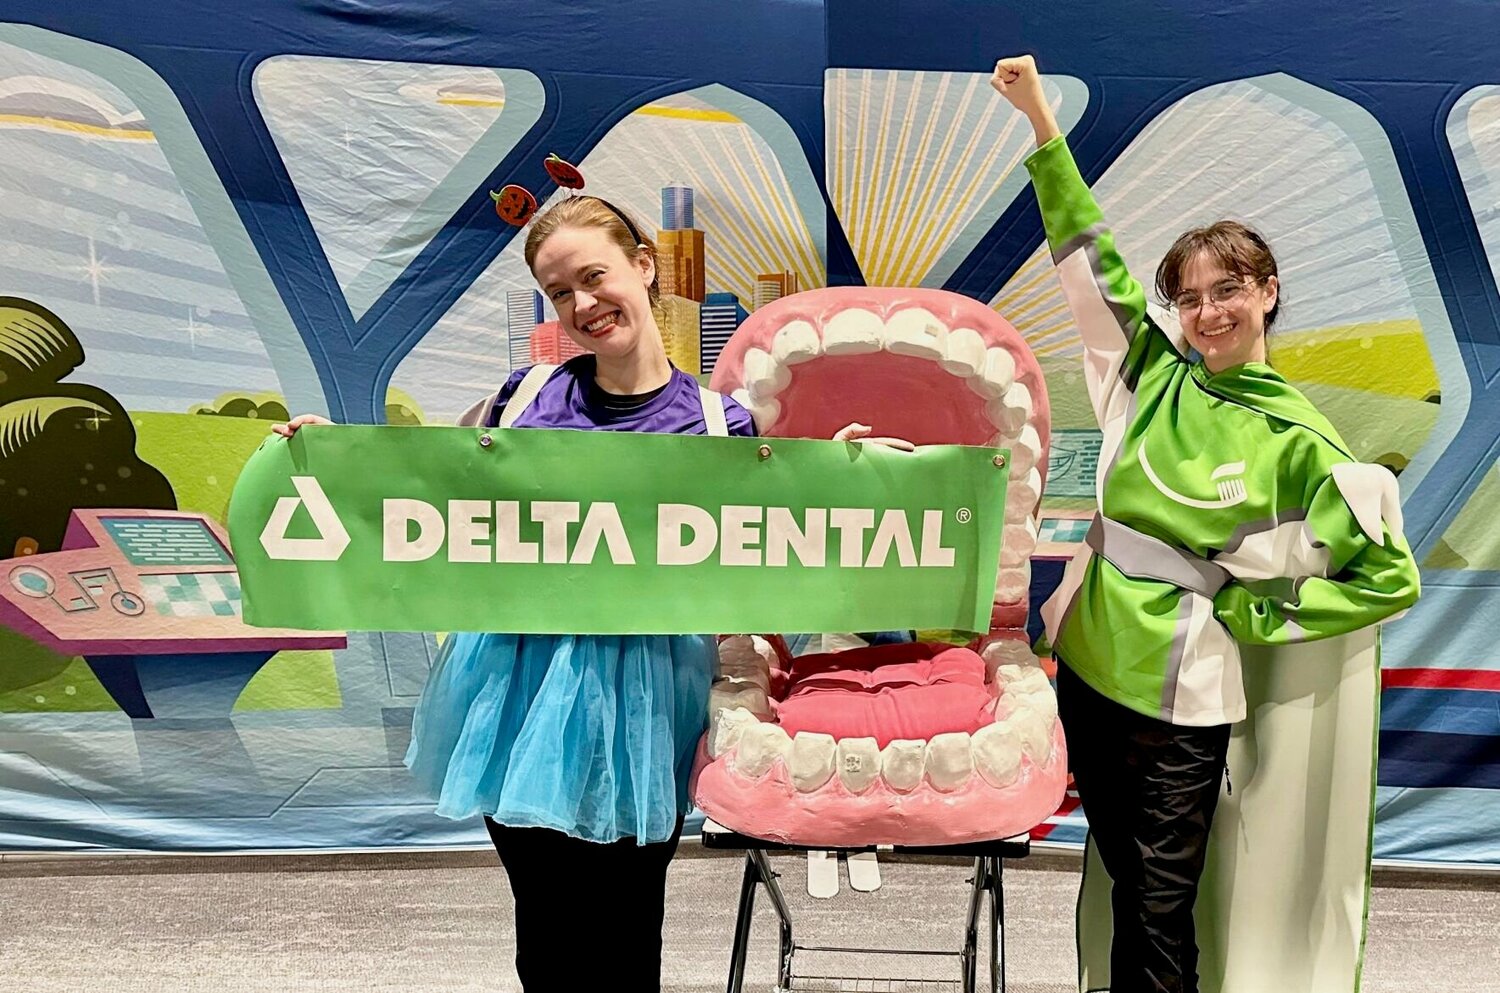 Delta Dental of Missouri's "Land of Smiles" program recently visited students at Glenwood School in West Plains with a program encouraging healthy oral care practices.